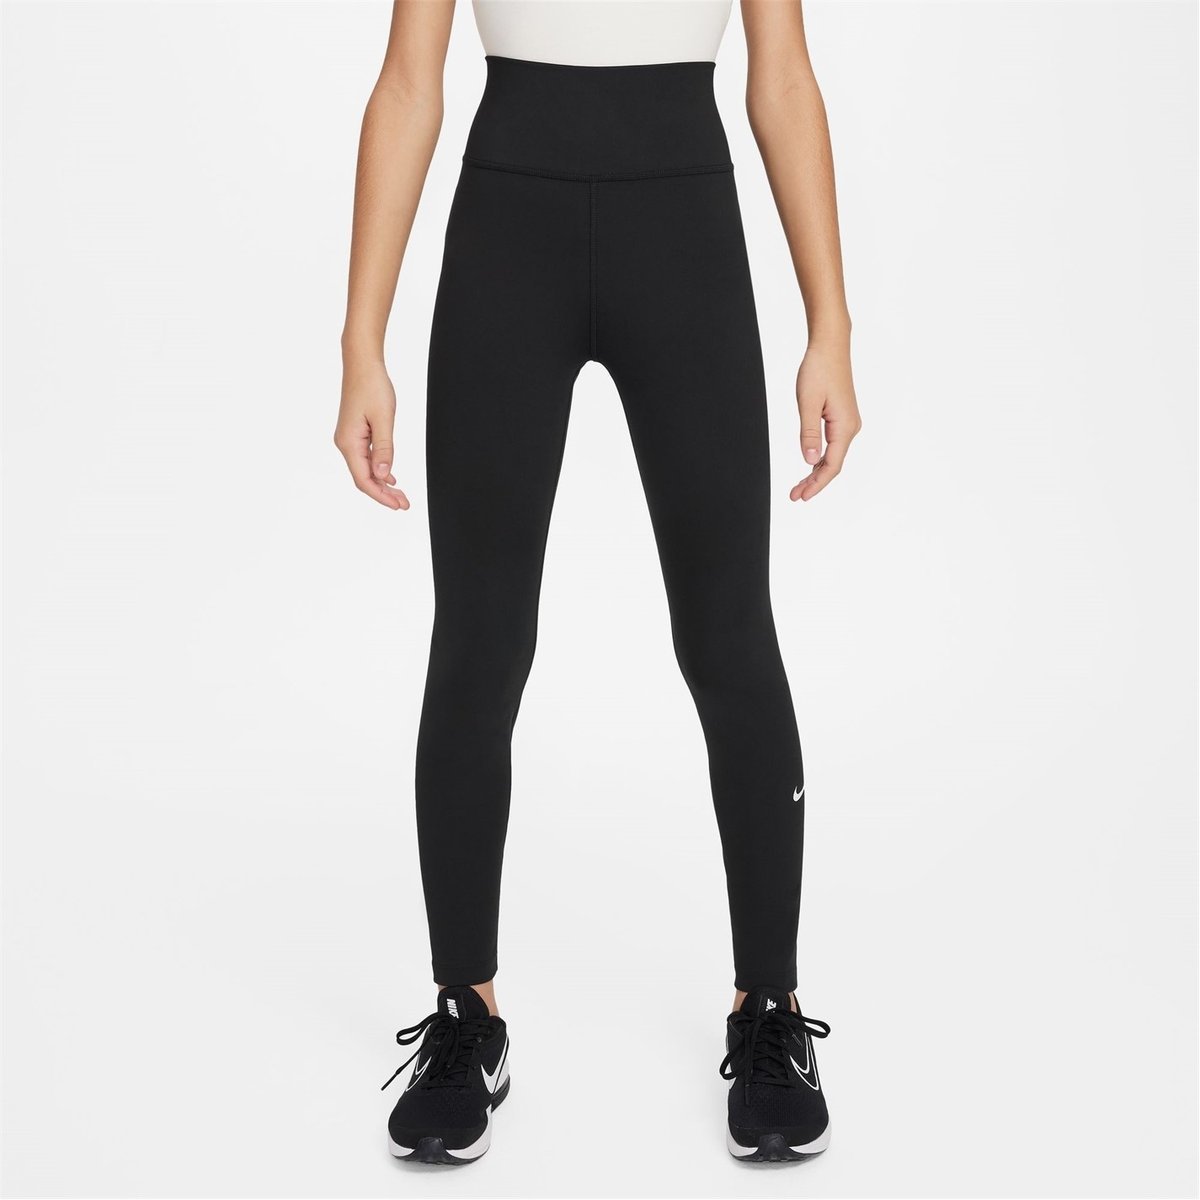 Running Tights and Trousers